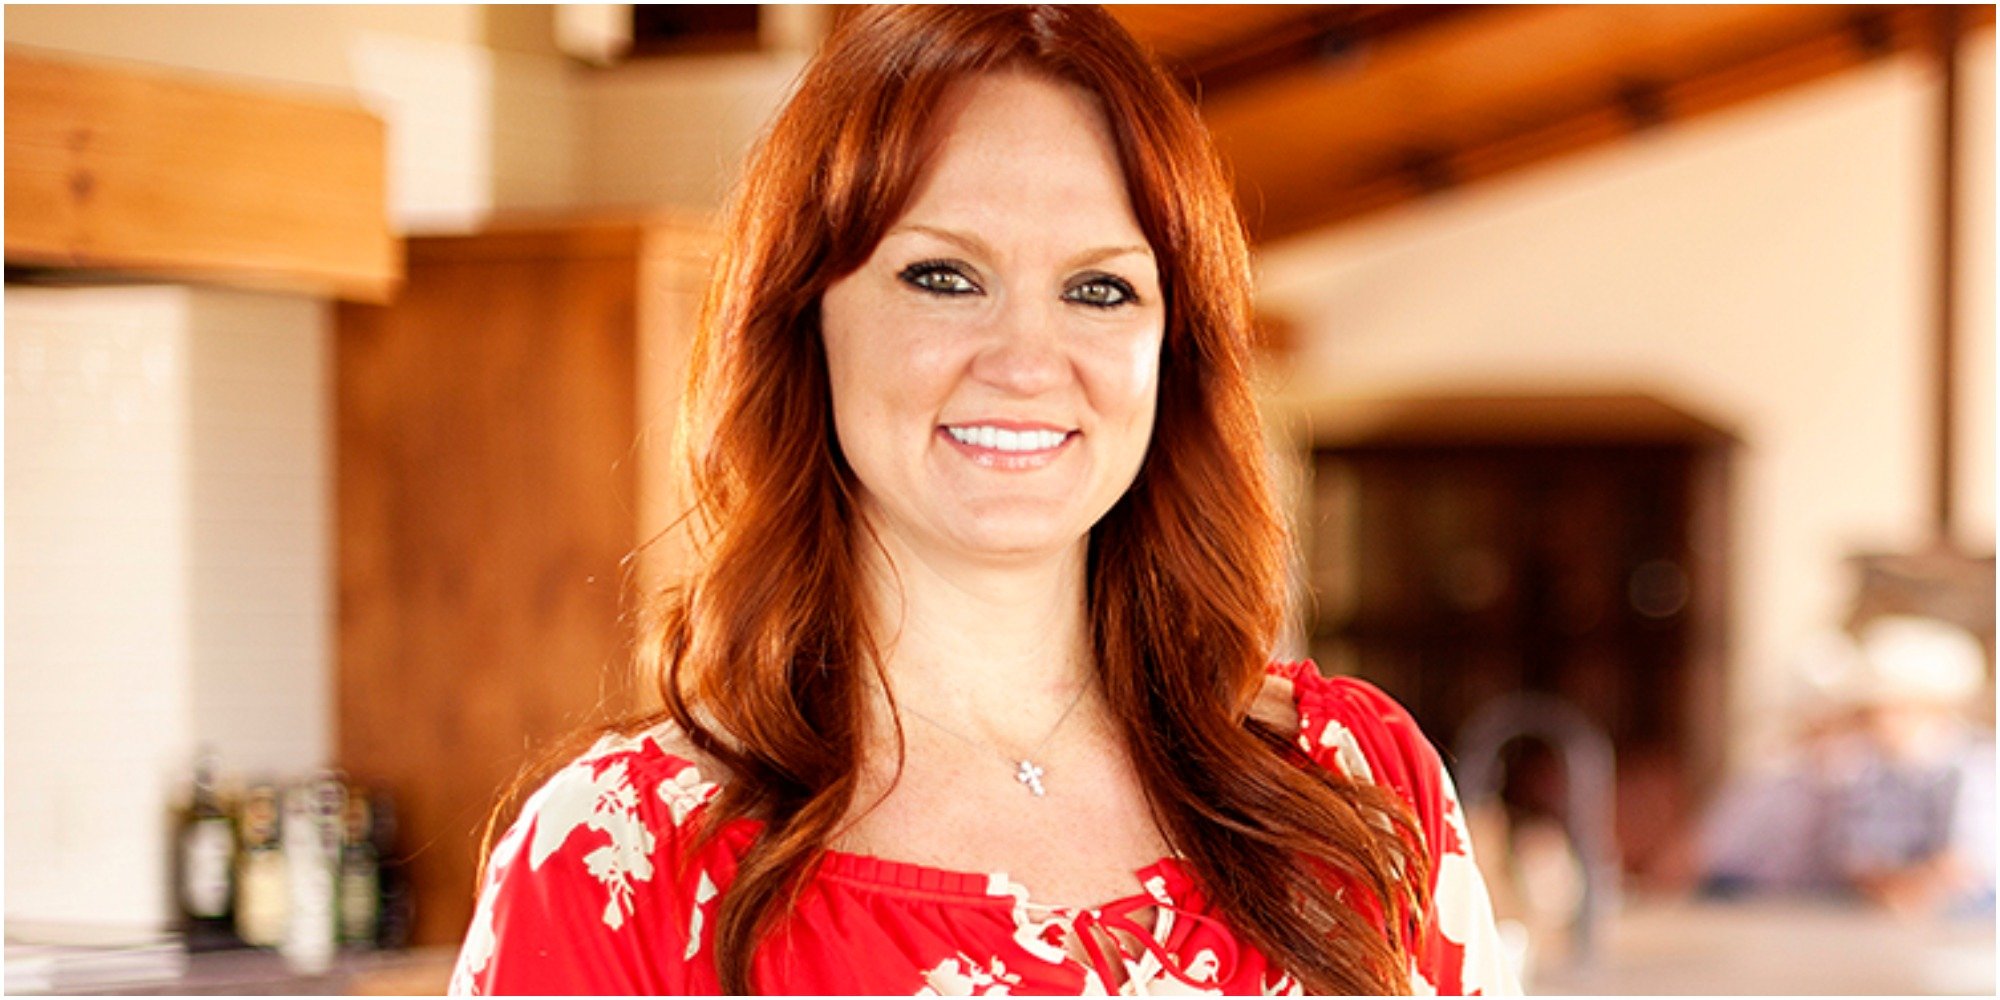 Ree Drummond poses for a press photograph in a floral blouse.